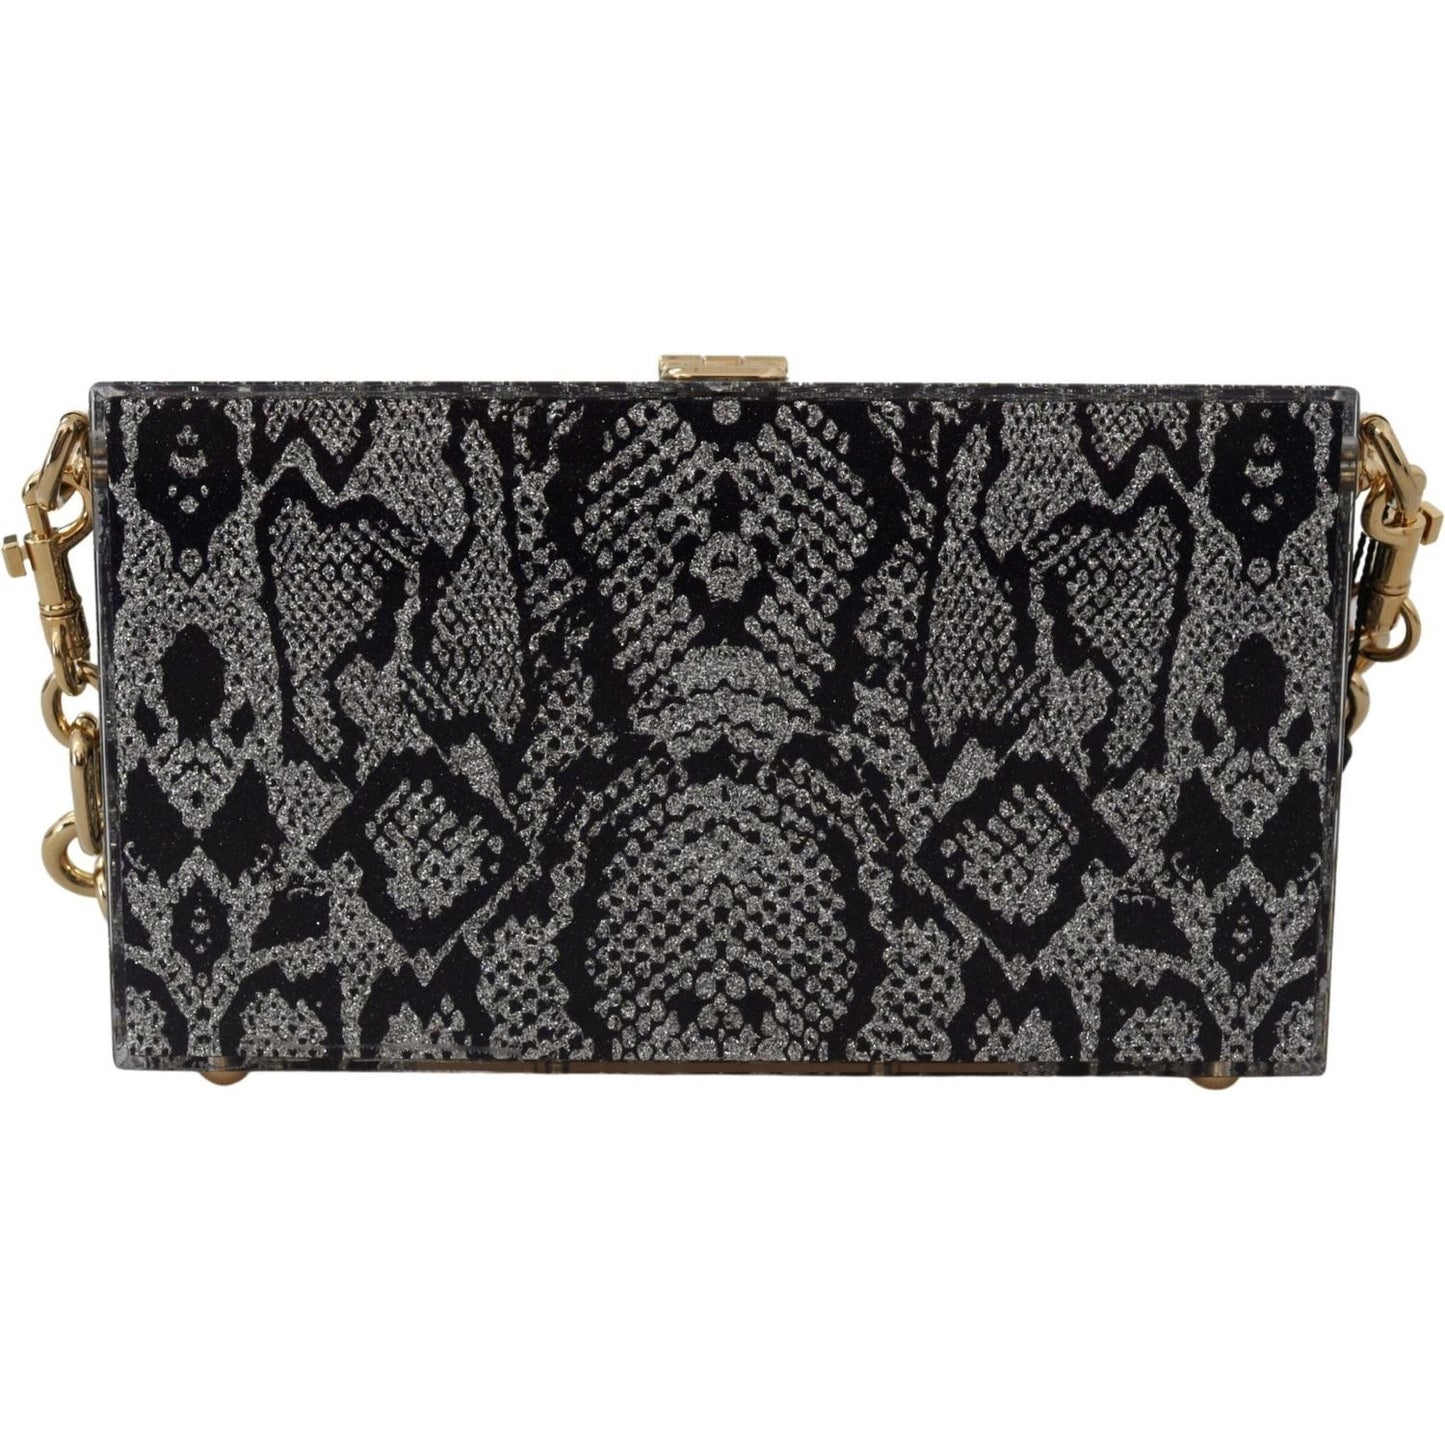 Dolce & Gabbana Gray Resin Dolce Box Clutch with Gold Details gray-fashion-devotion-clutch-plexi-sicily-box-purse WOMAN SHOULDER BAGS IMG_1511-scaled-a58e7806-fa9.jpg